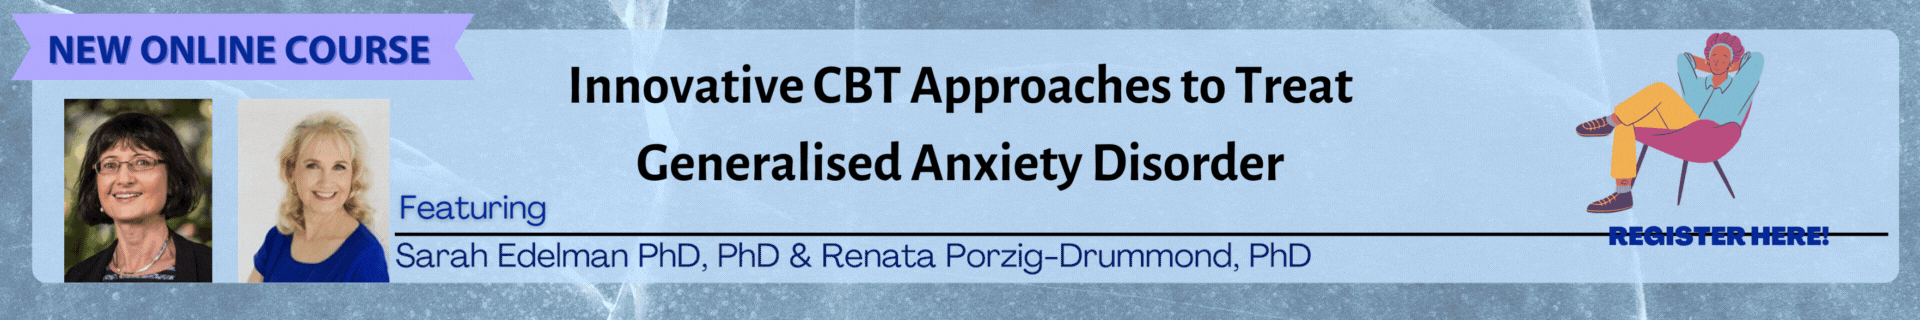 Innovative Cognitive Behavioural Therapy Approaches to Successfully Treat Generalised Anxiety Disorder